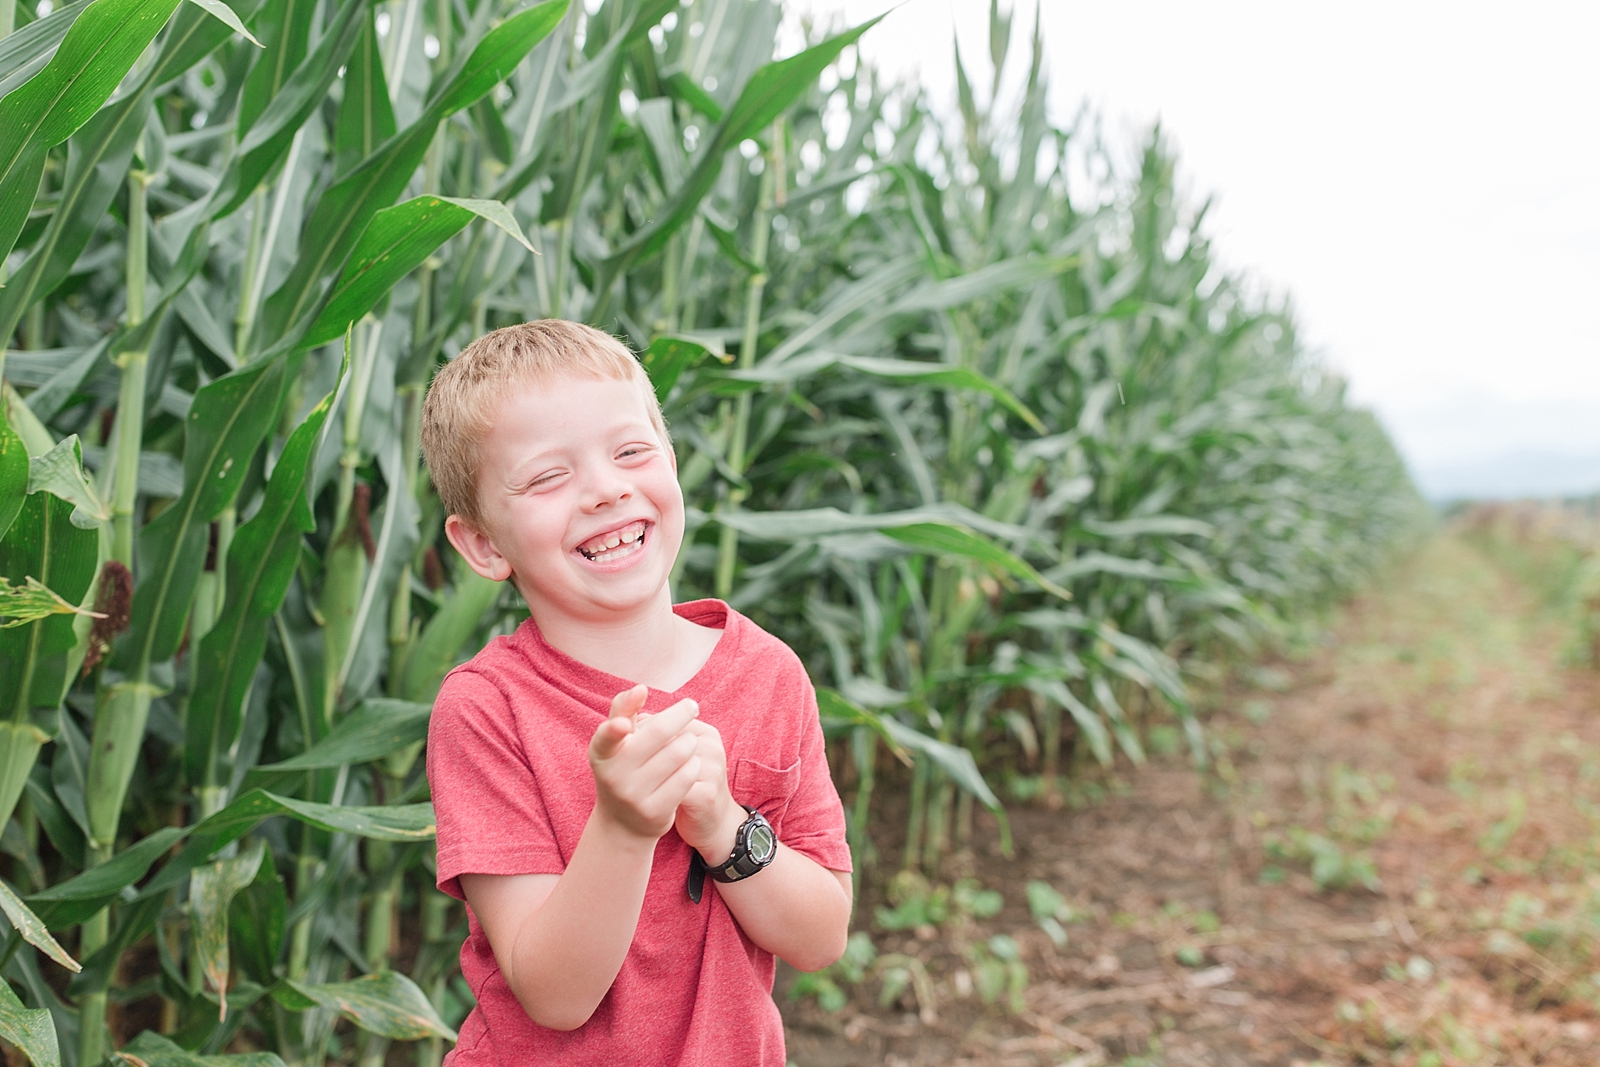 Little boy laughing in a cornfield photo